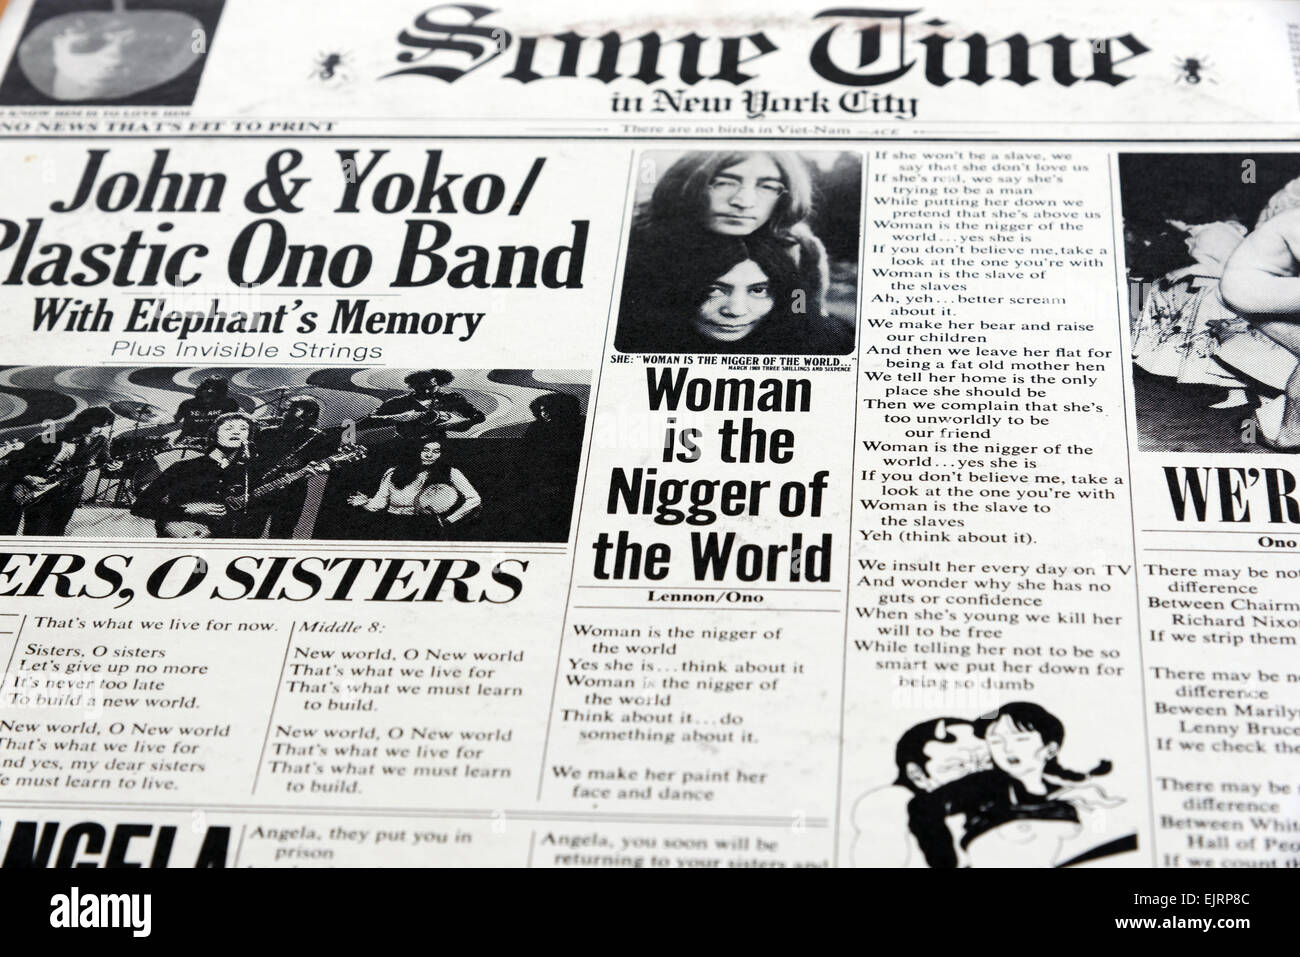 Woman Is The Nigger Of The World - John Lennon/Plastic Ono Band